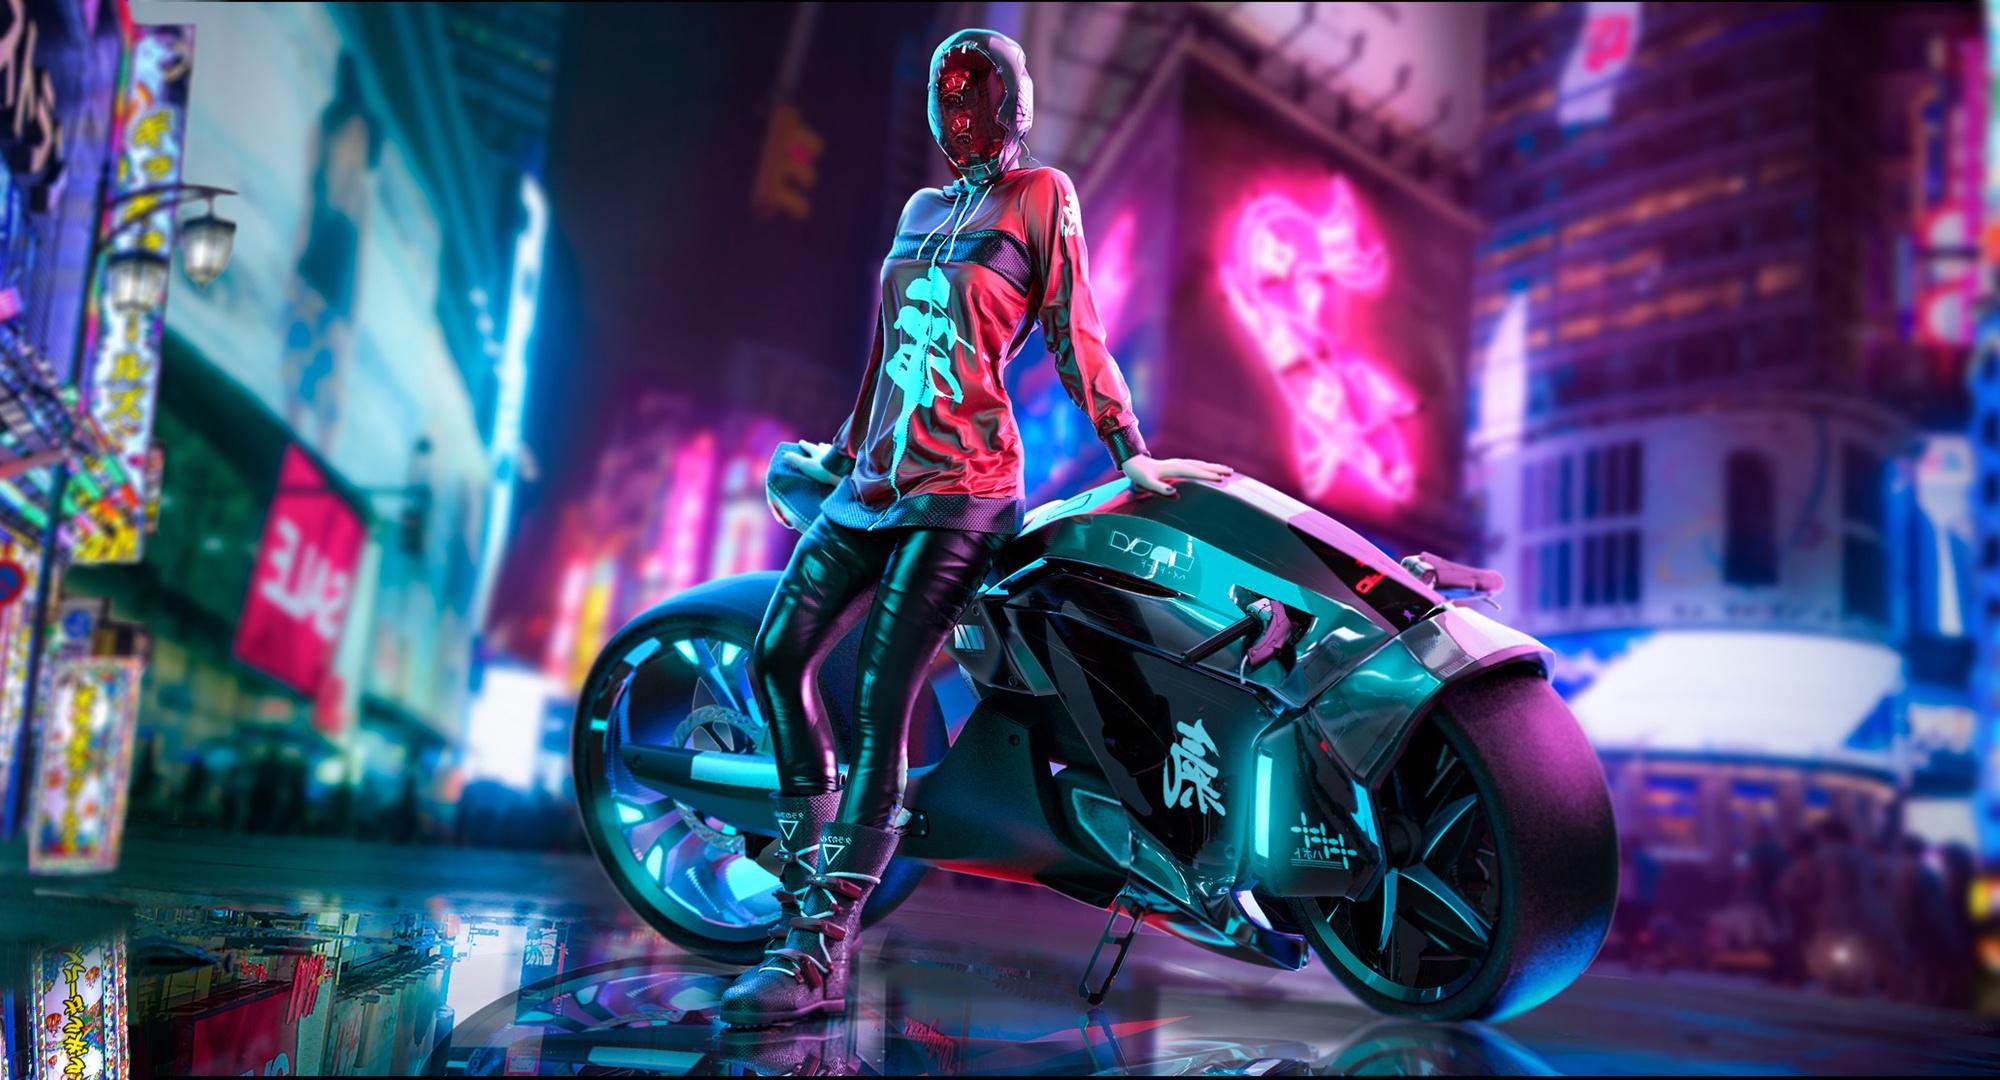 Motorcycle, Cyberpunk, Girl wallpaper and background. Sci